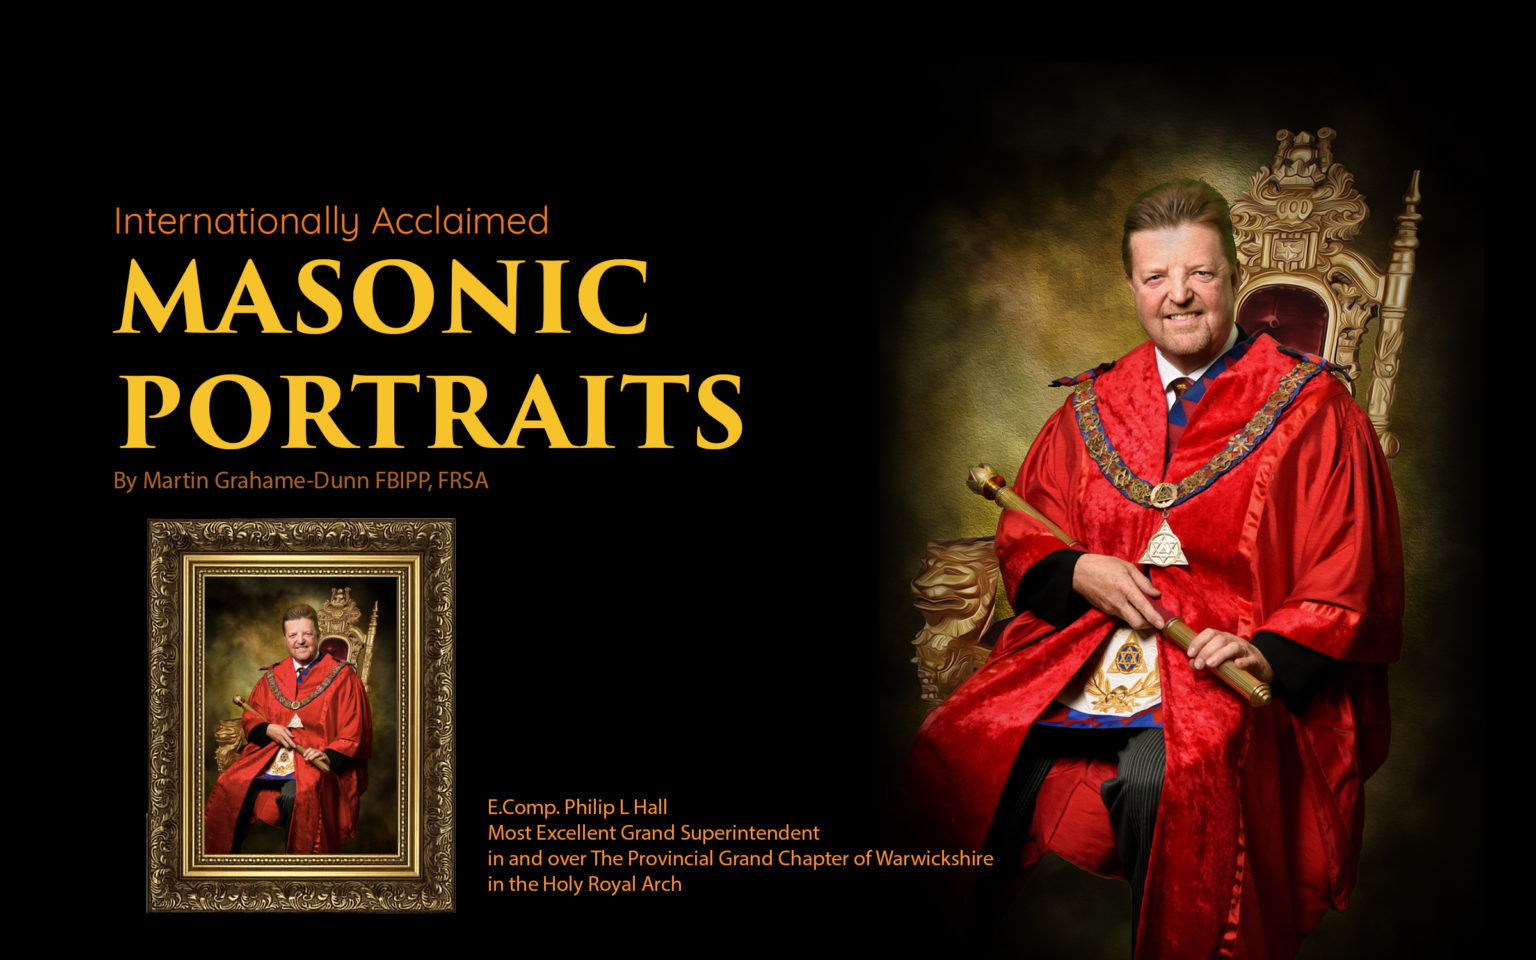 E.Comp Philip L Hall. Most Excellent Grand Superintendent in and over the Holy Royal Arch Province of Warwickshire